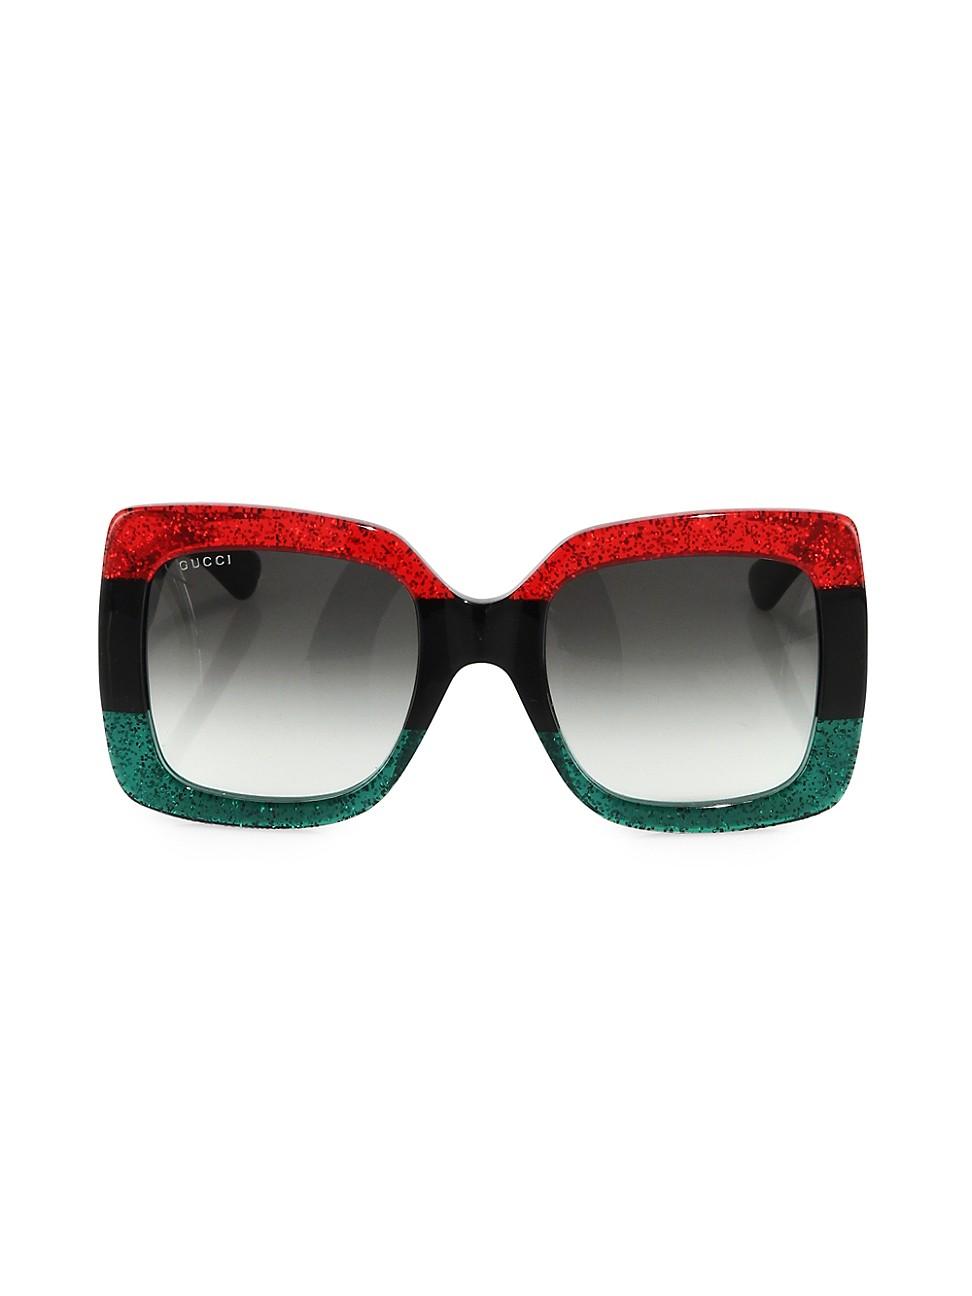 gucci green and red glasses